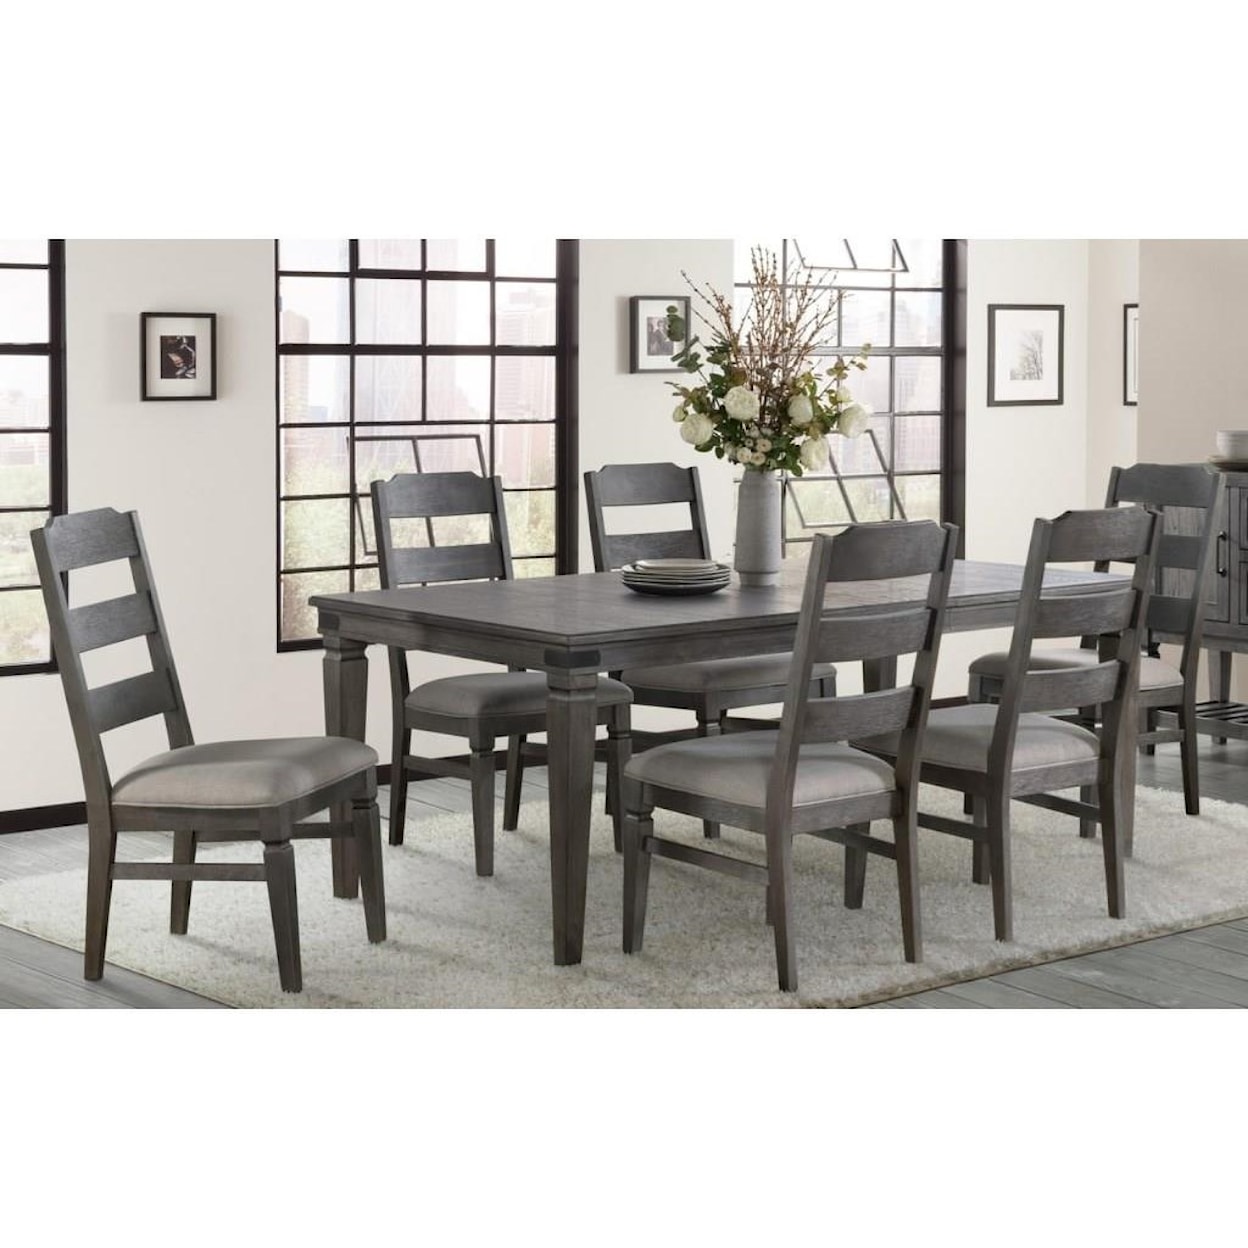 Intercon Foundry 5-Piece Table and Chair Set